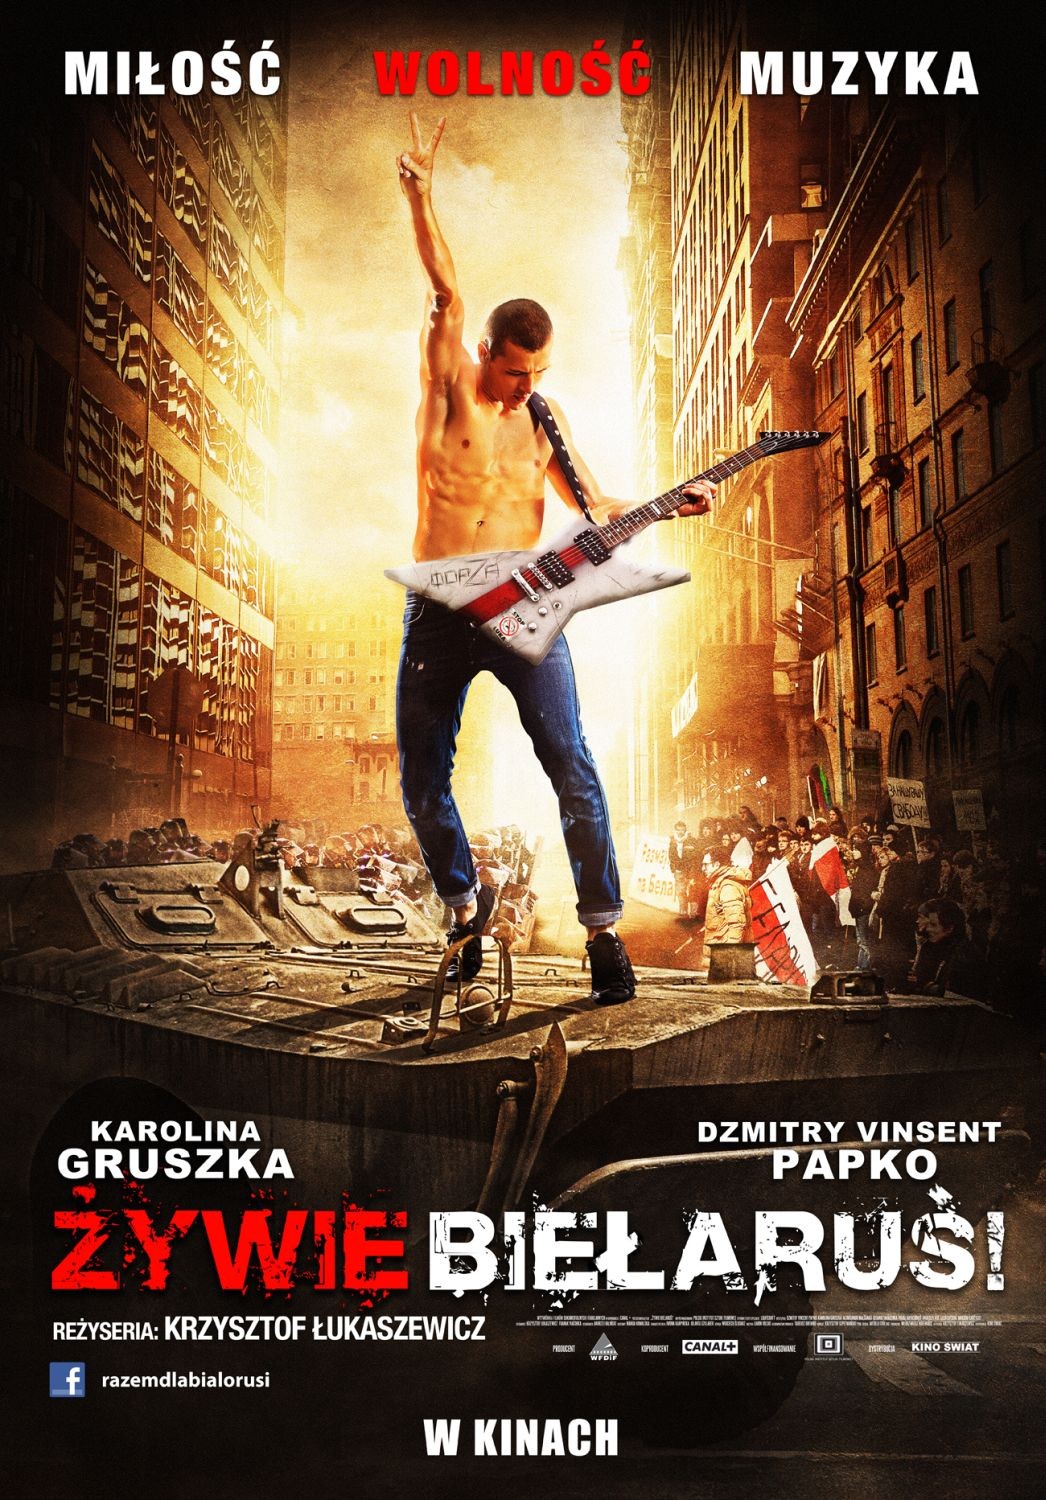 Extra Large Movie Poster Image for Zyvie Belarus 